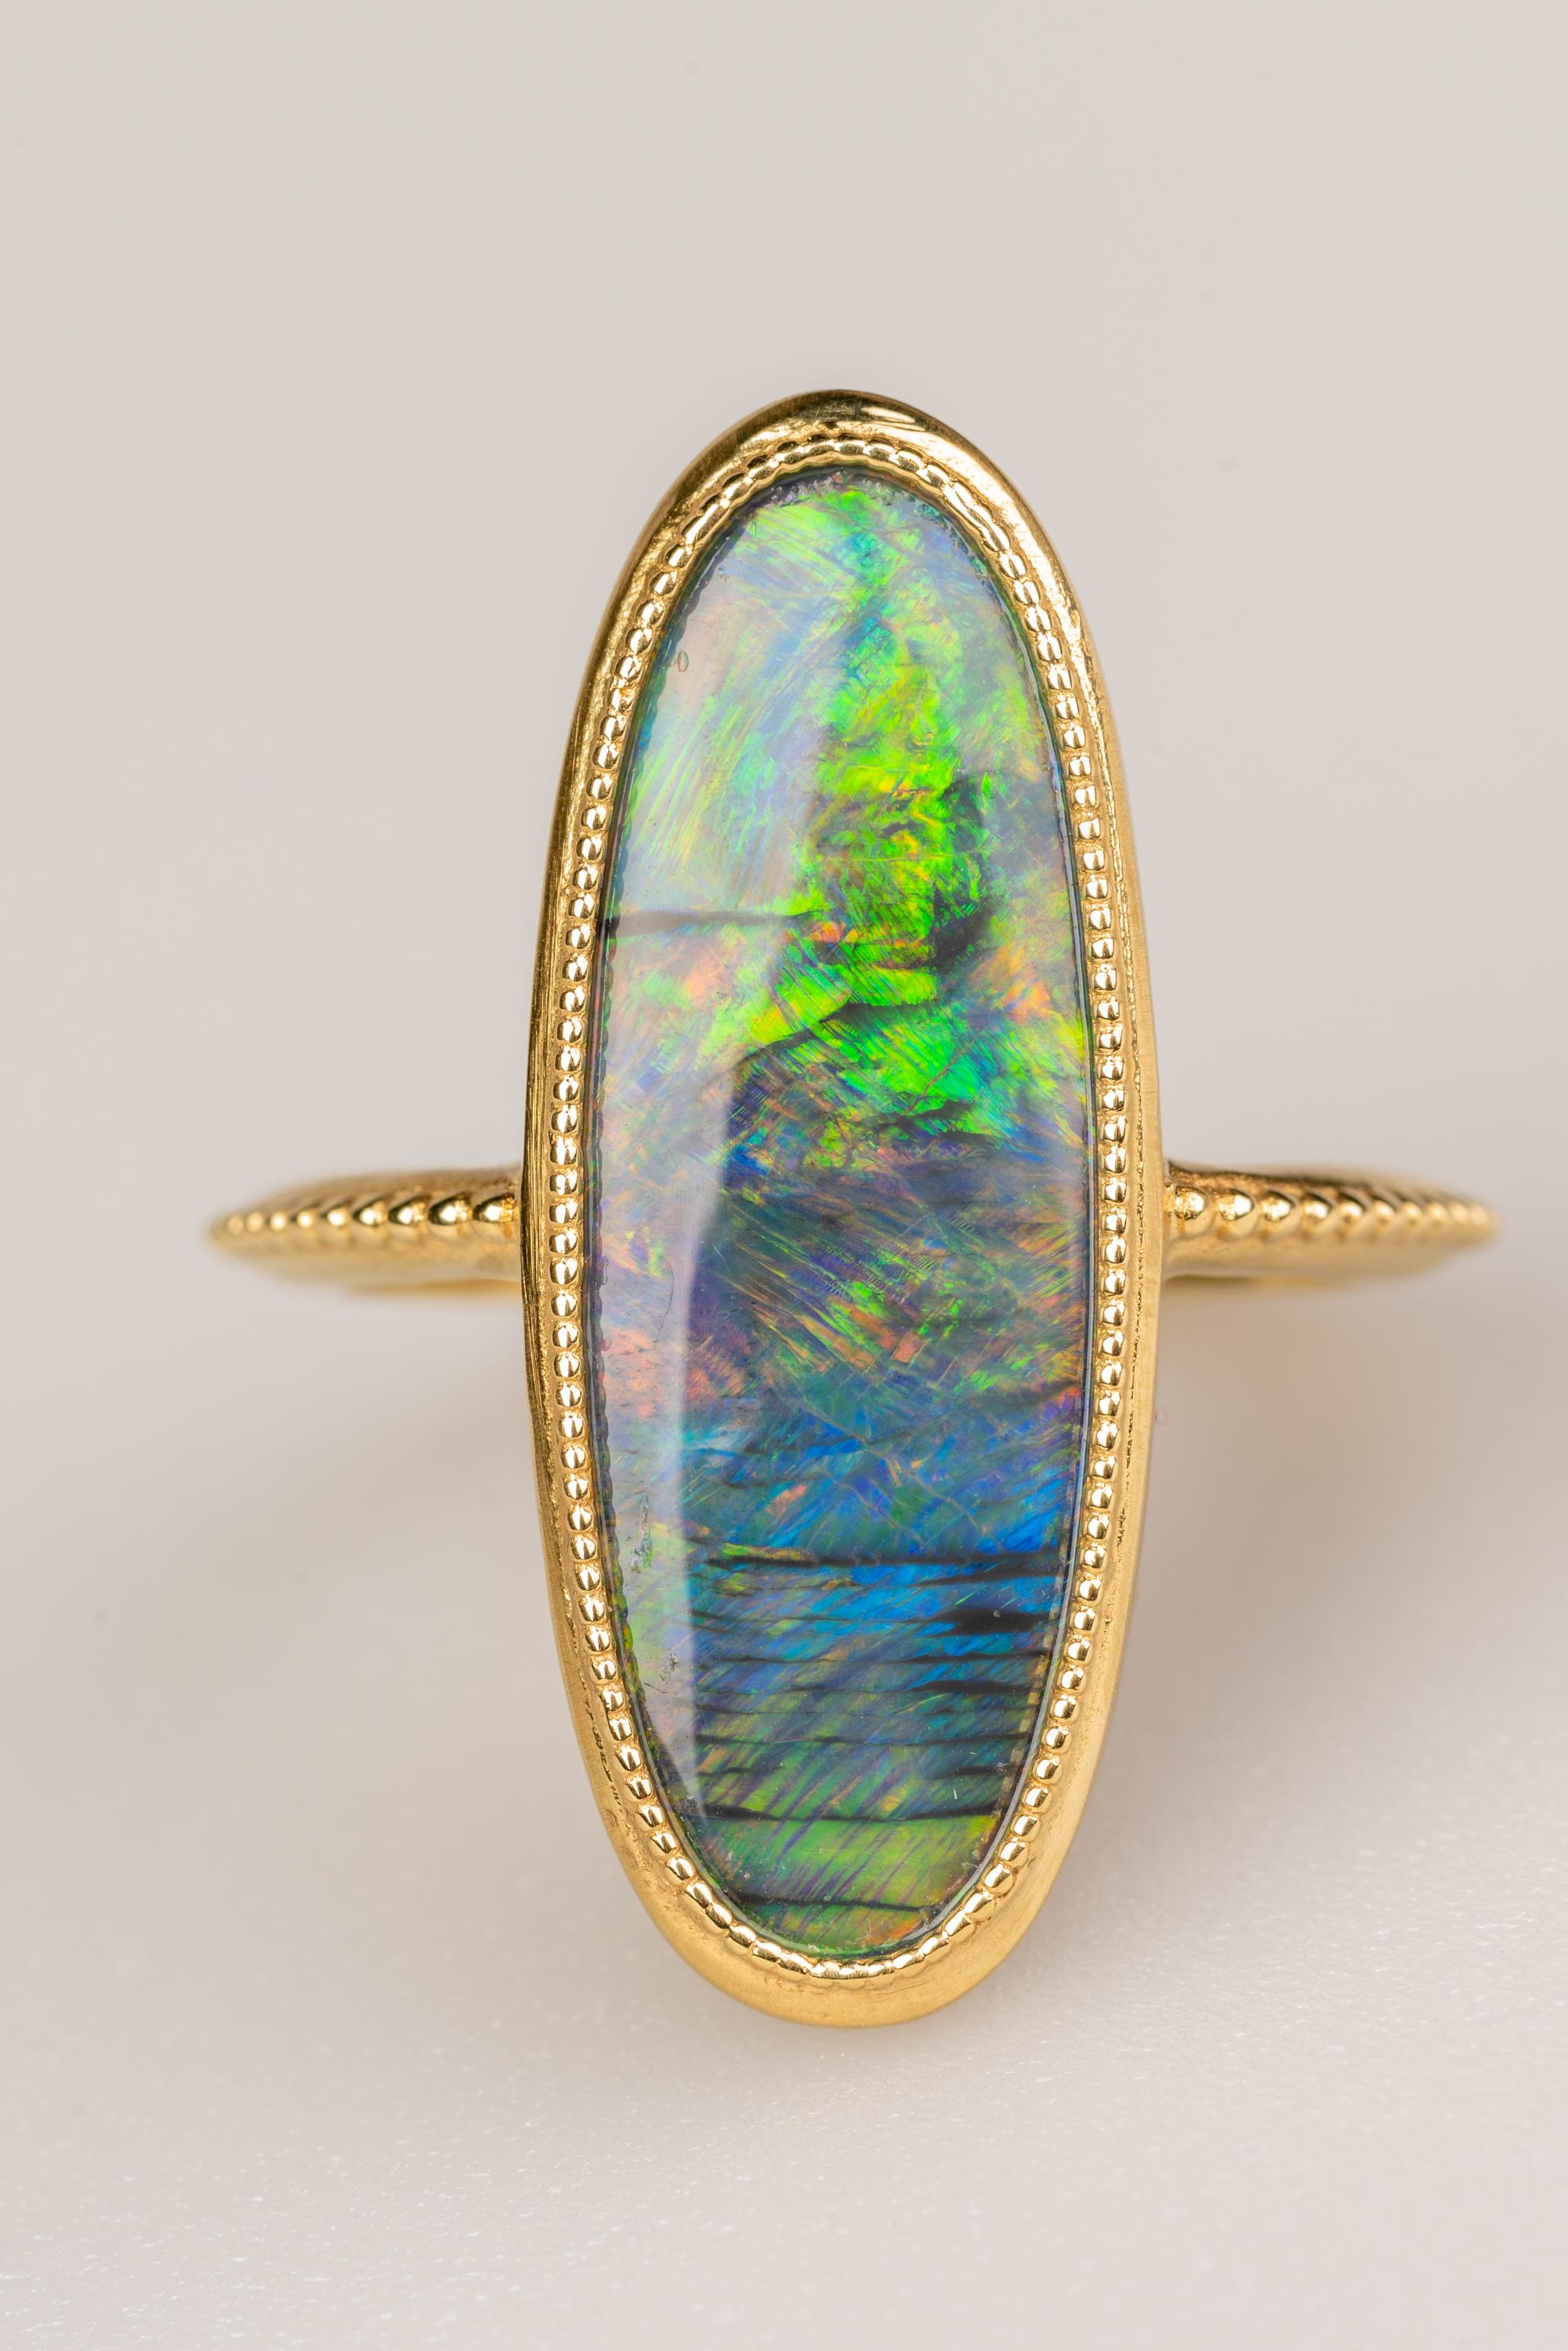 An 18k yellow gold ring featuring one bezel set oval freeform Lightning Ridge Australian black opal 3.83 carats and accented with bead work around the ring. Ring size 6.5. This ring was designed and made by llyn strong.